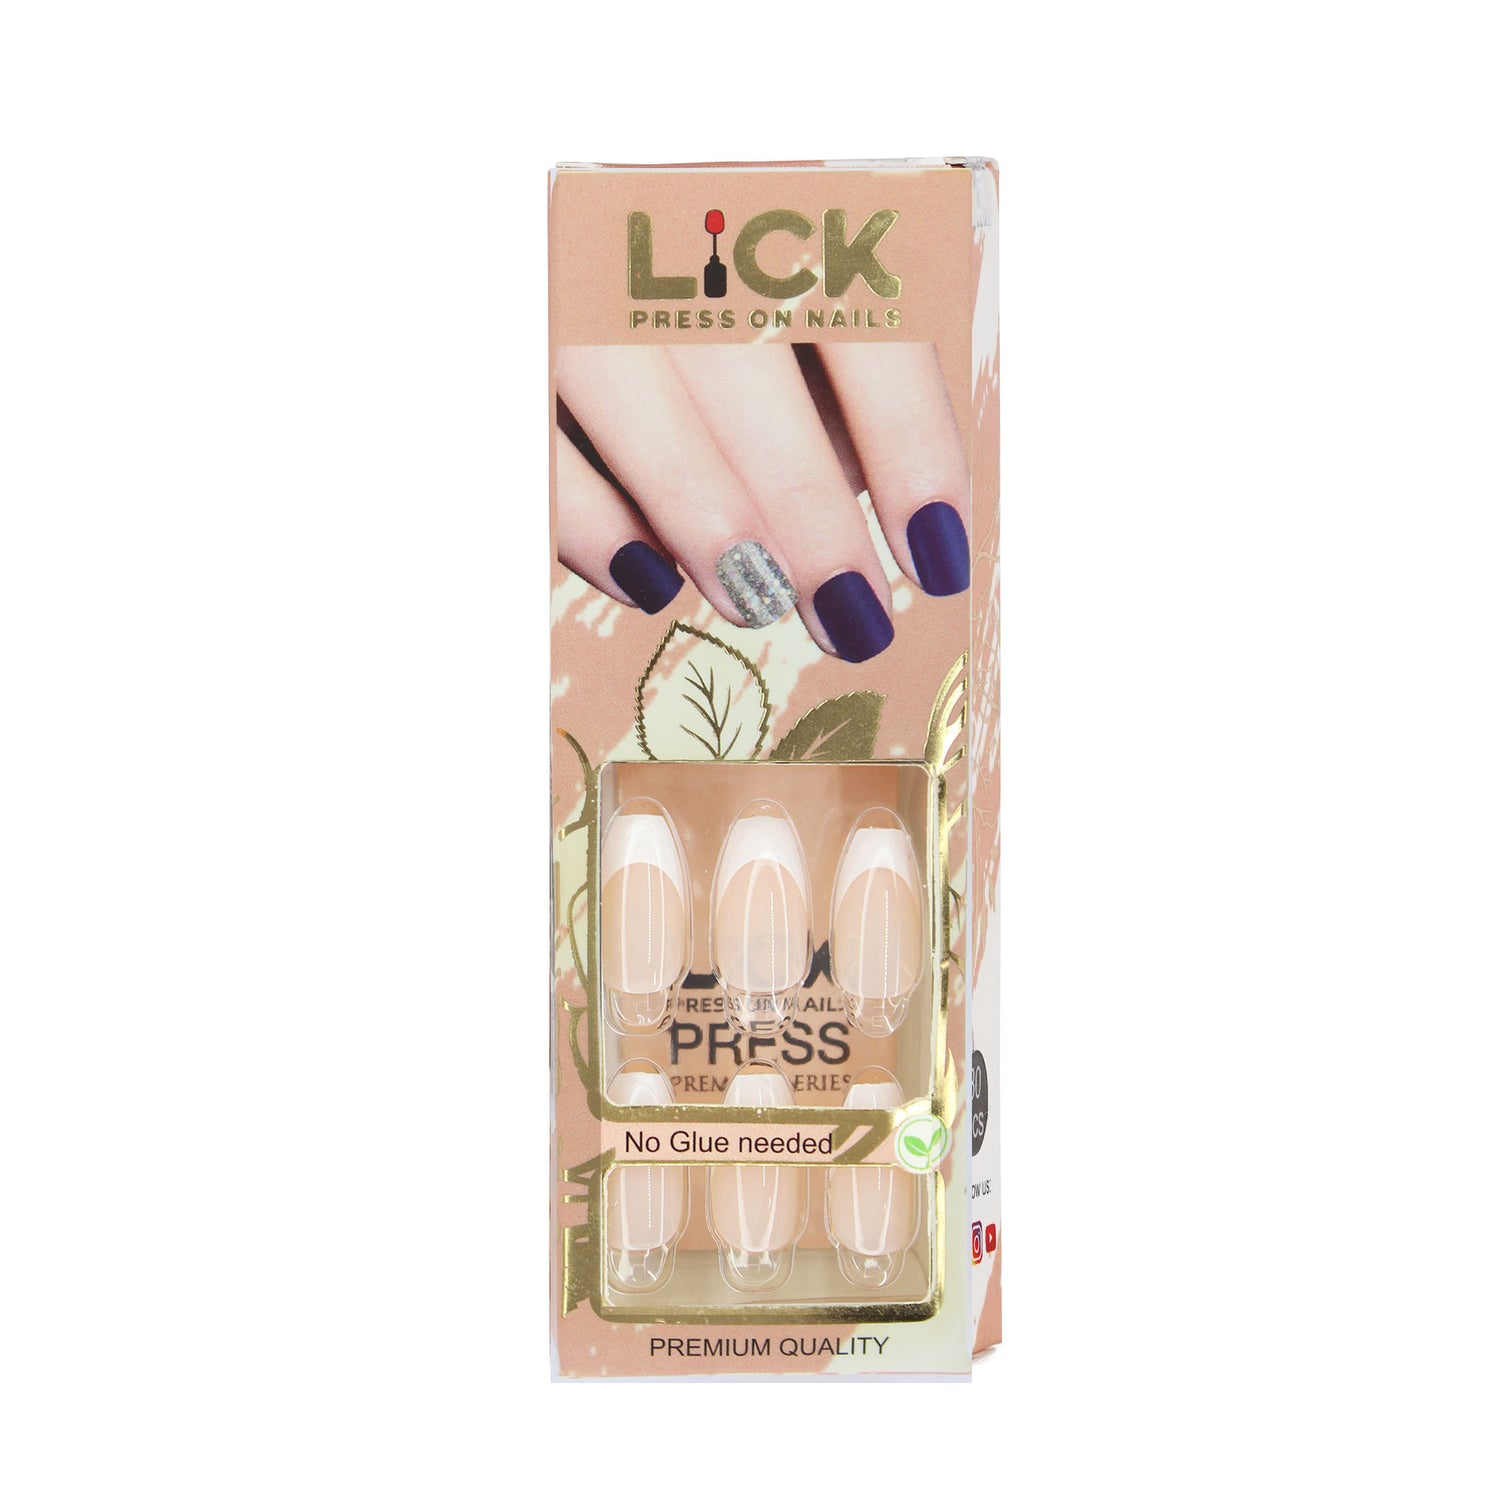 Lick nail classic French